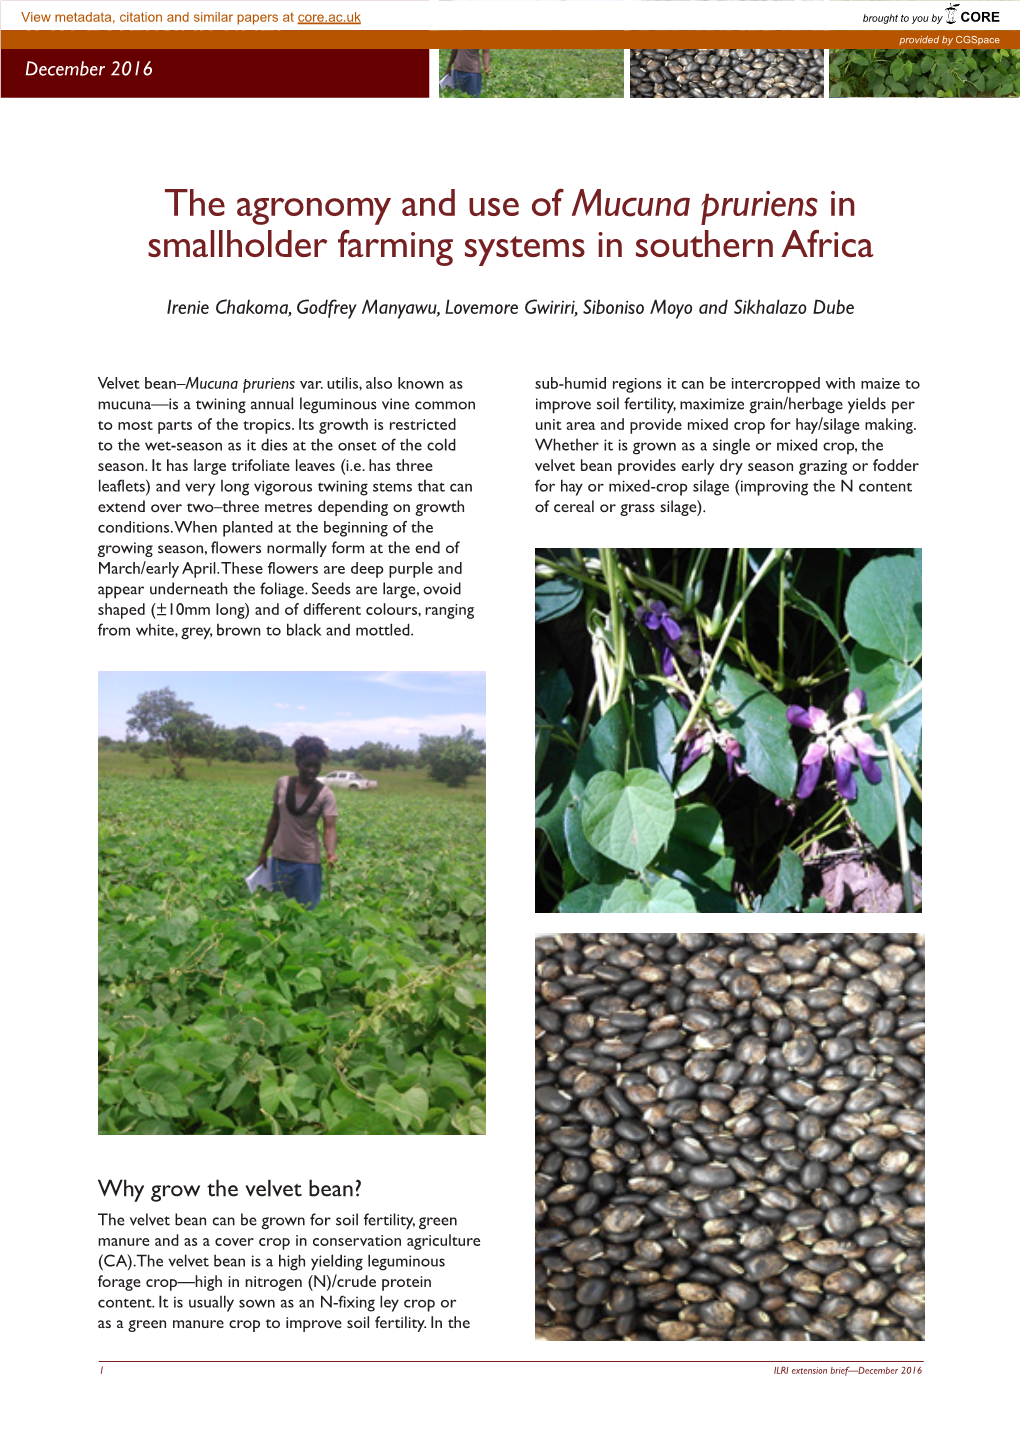 Mucuna Pruriens in Smallholder Farming Systems in Southern Africa